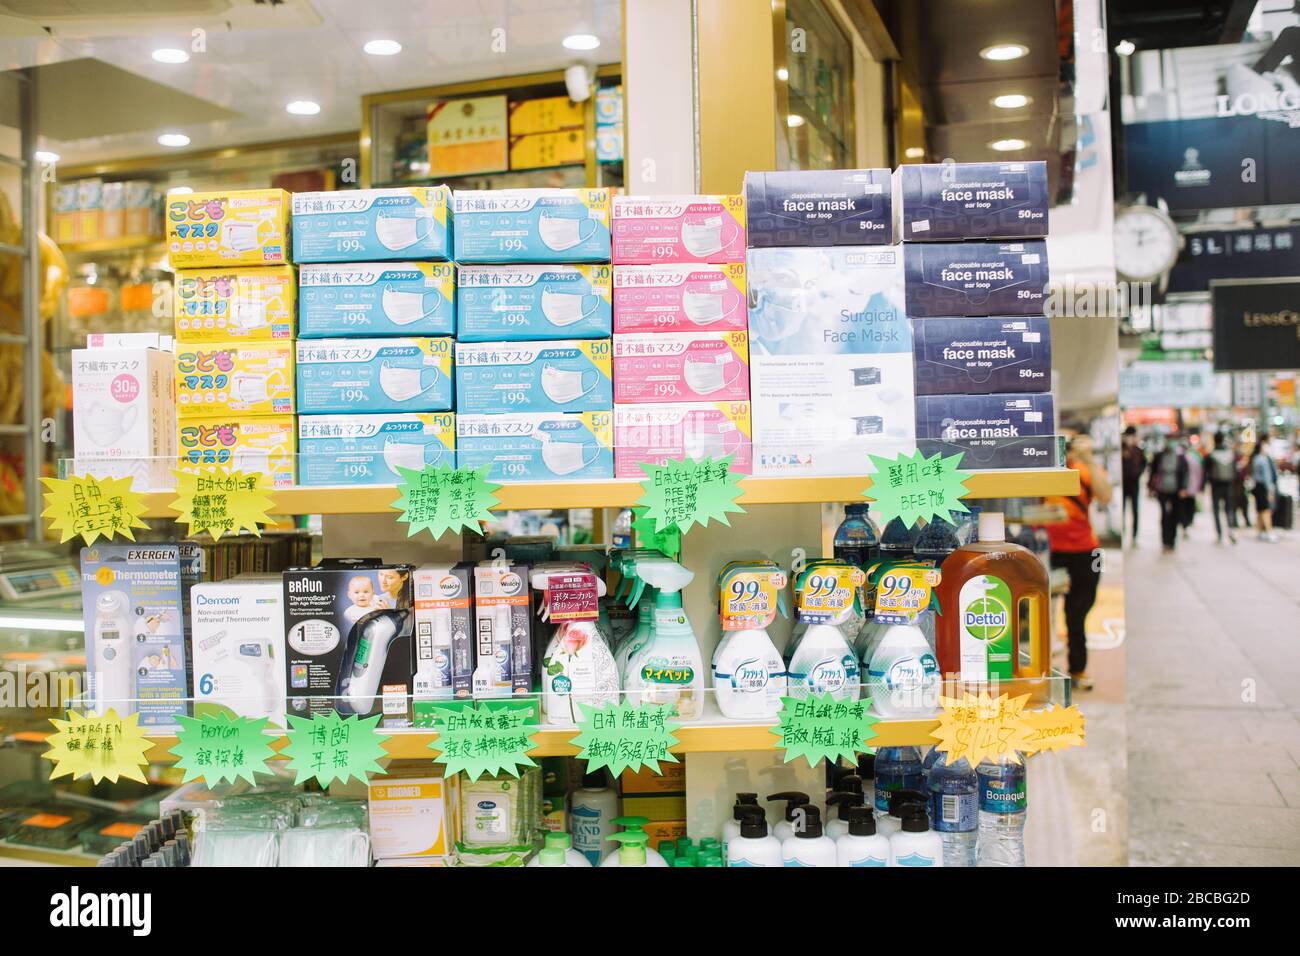 Hong Kong, 04 April 2020 - Surgical masks are being sold in Hong Kong with an increased price due to coronavirus. Stock Photo